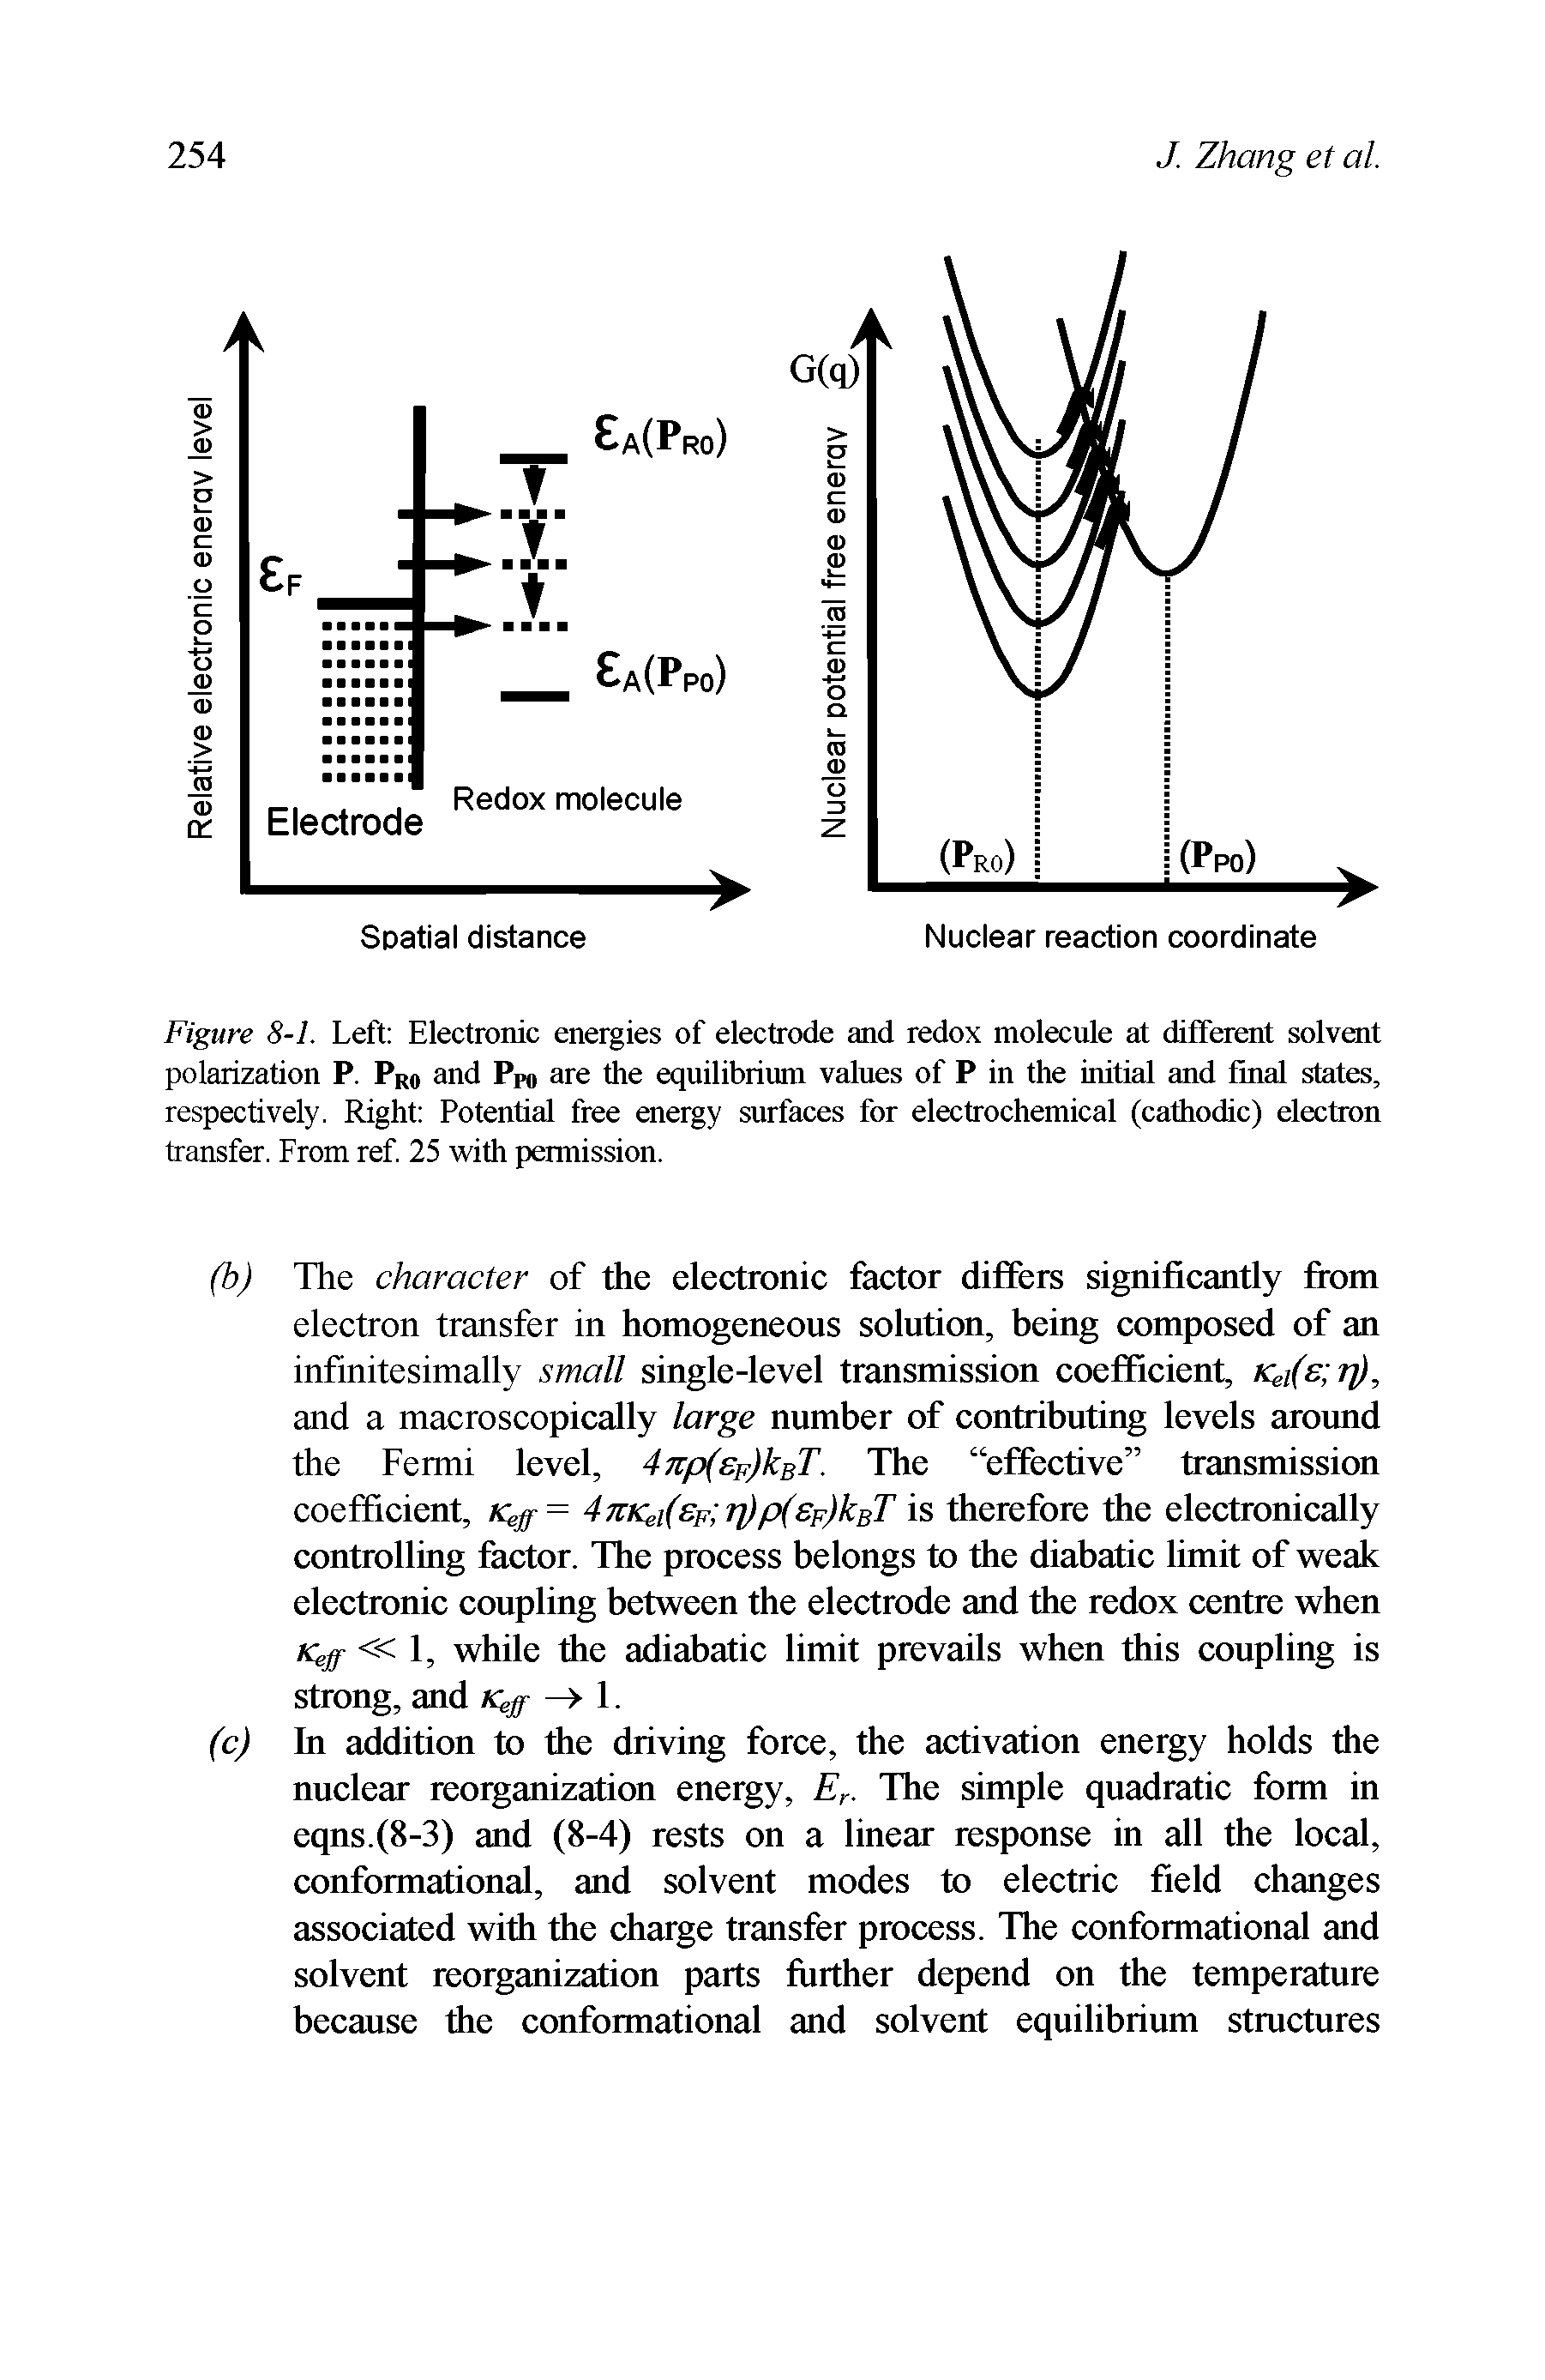 Figure 8-1. Left Electronic energies of electrode and redox molecule at different solvent polarization P. Pro and Ppo are the equilibrium values of P in the initial and final stafes, respectively. Right Potential free energy surfaces for electrochemical (cathodic) electron transfer. From ref 25 with permission.